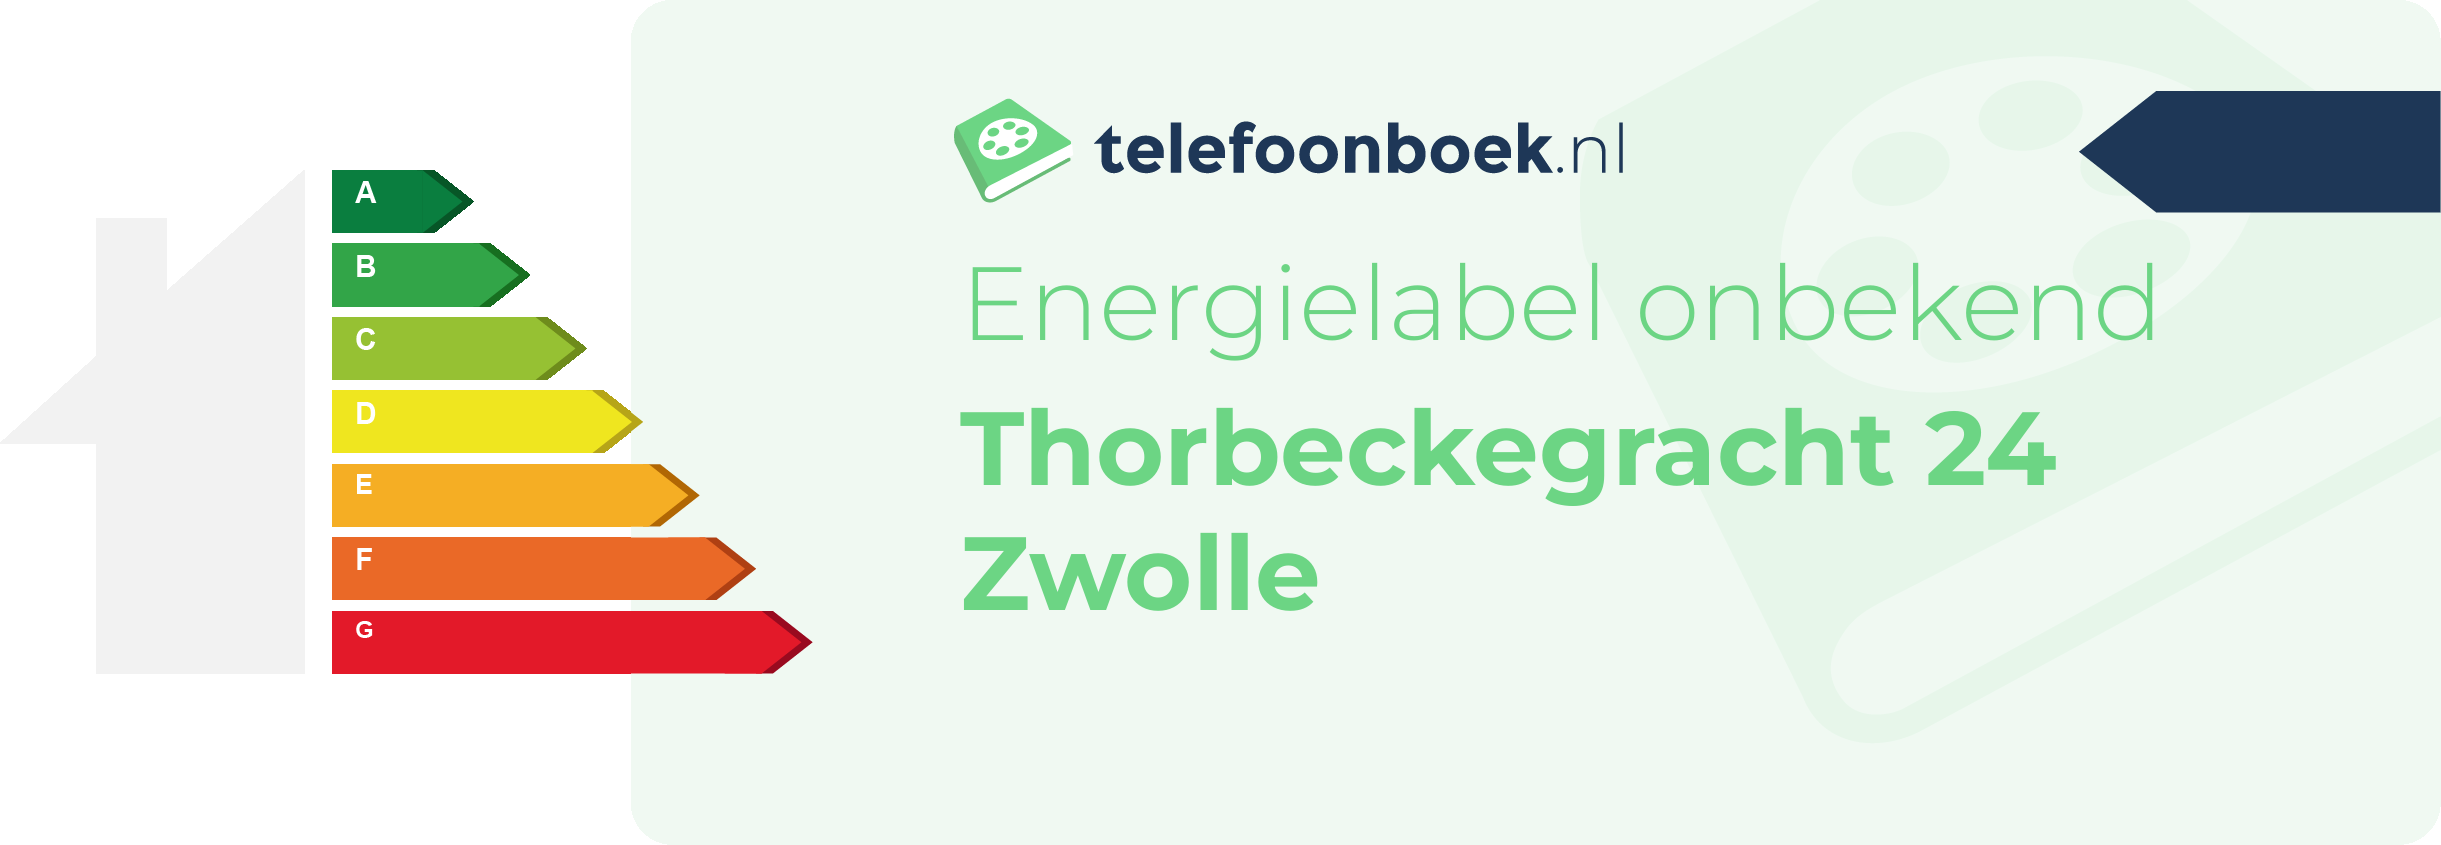 Energielabel Thorbeckegracht 24 Zwolle